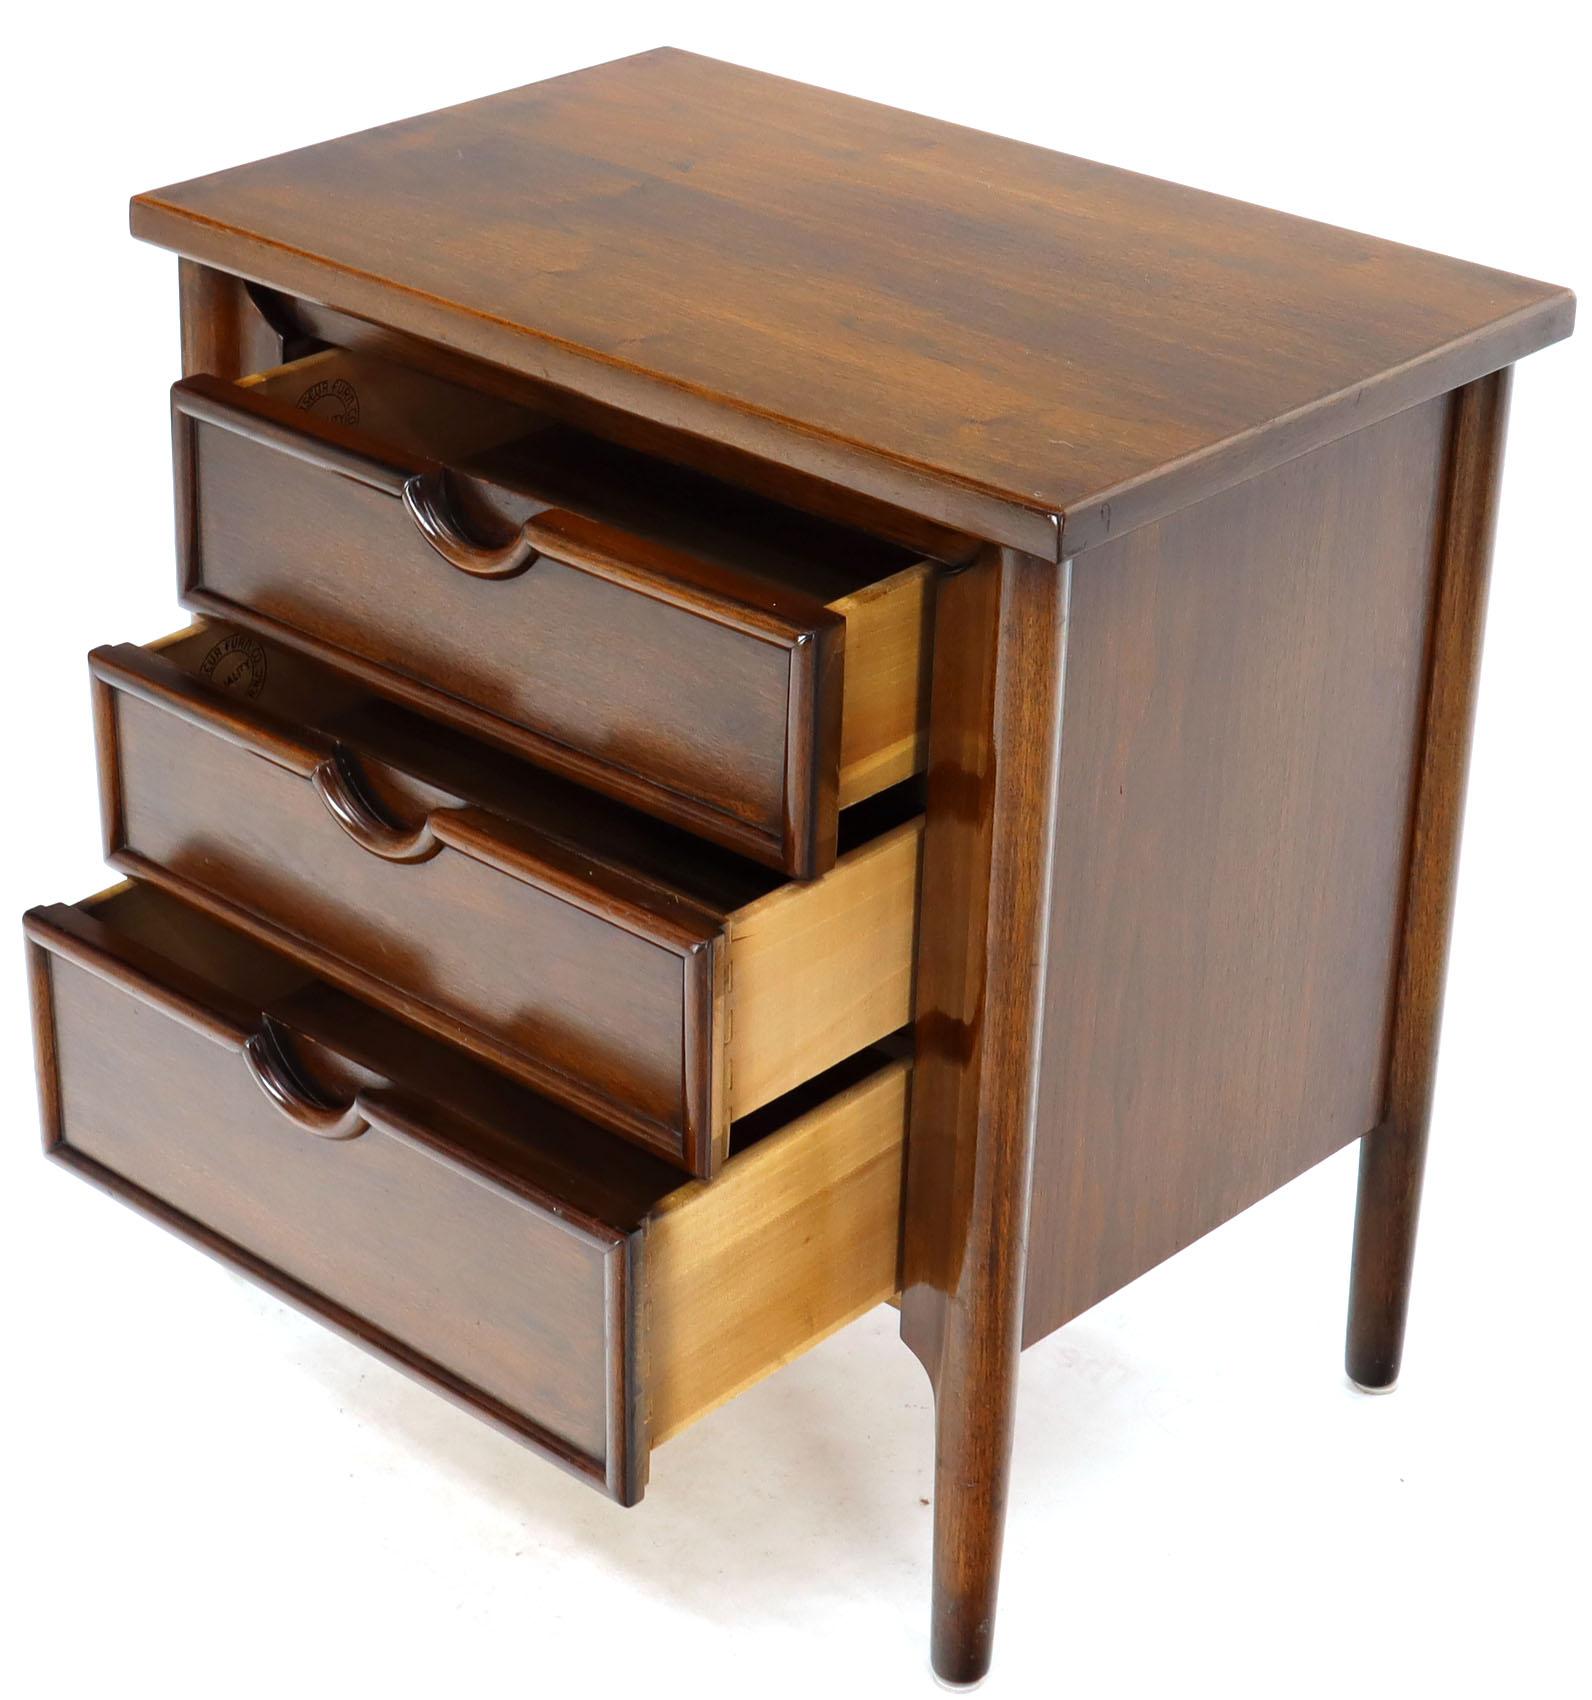 Mid-Century Modern pair of sculpted legs night stands. Nice carved molding around the drawer faces along with the drawer pulls. Good size high quality craftsmanship cabinets looking nearly miniature bachelor chests. In style of Robsjohn-Gibbings.